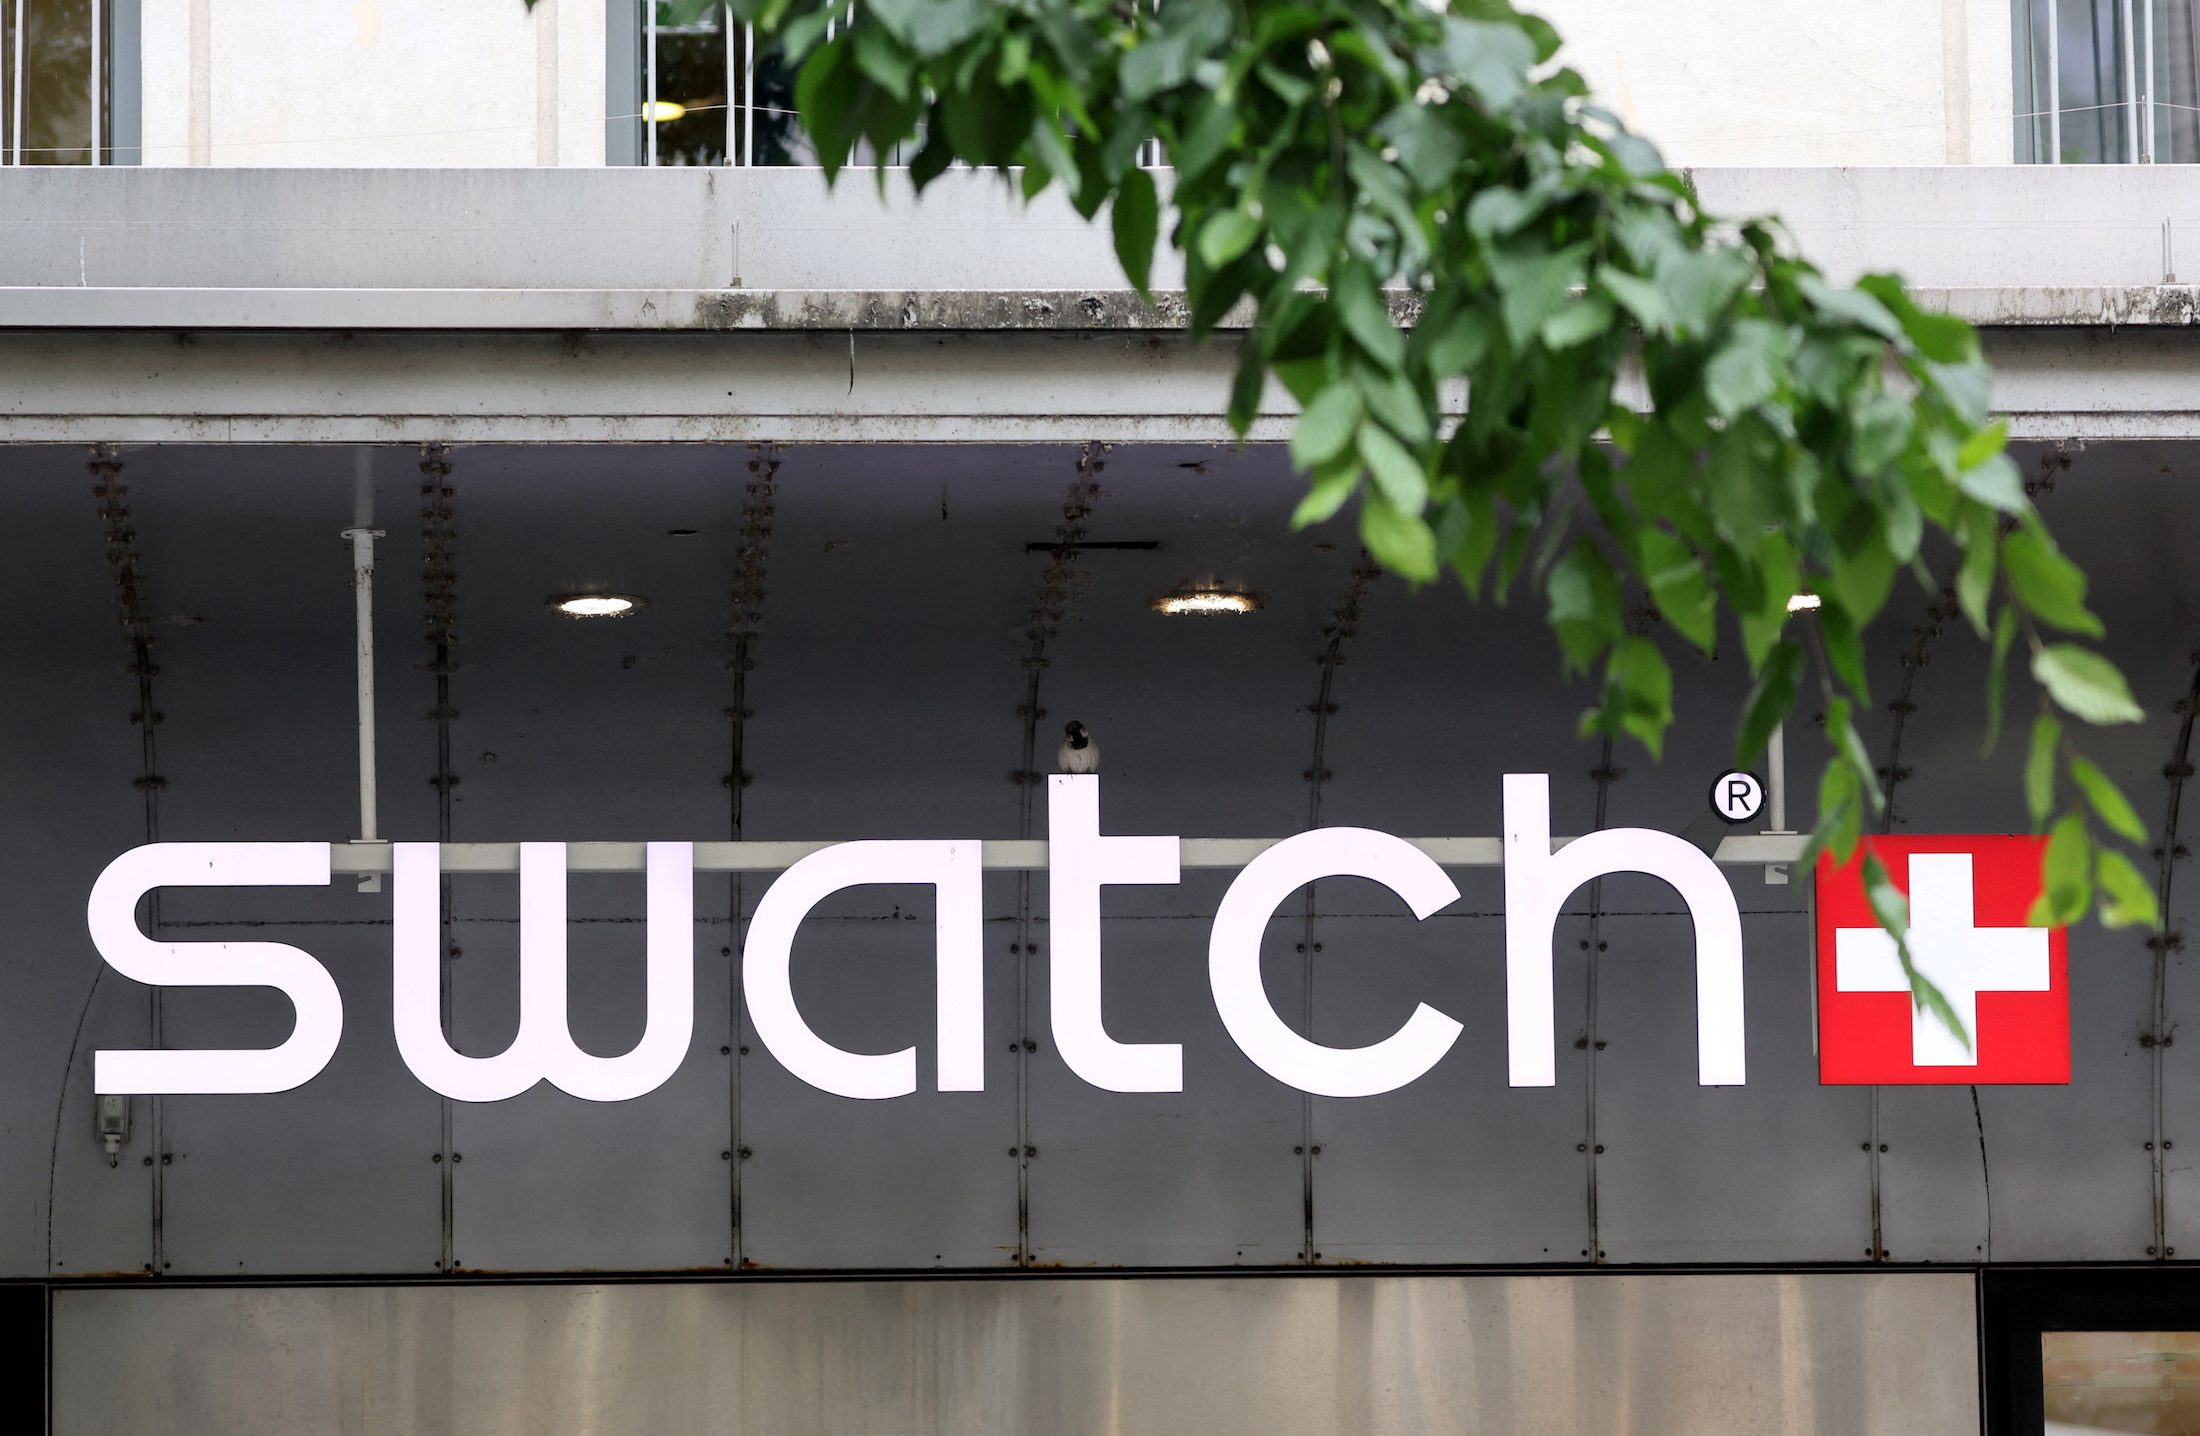 Rainbow Swatch watches confiscated in Malaysia – company